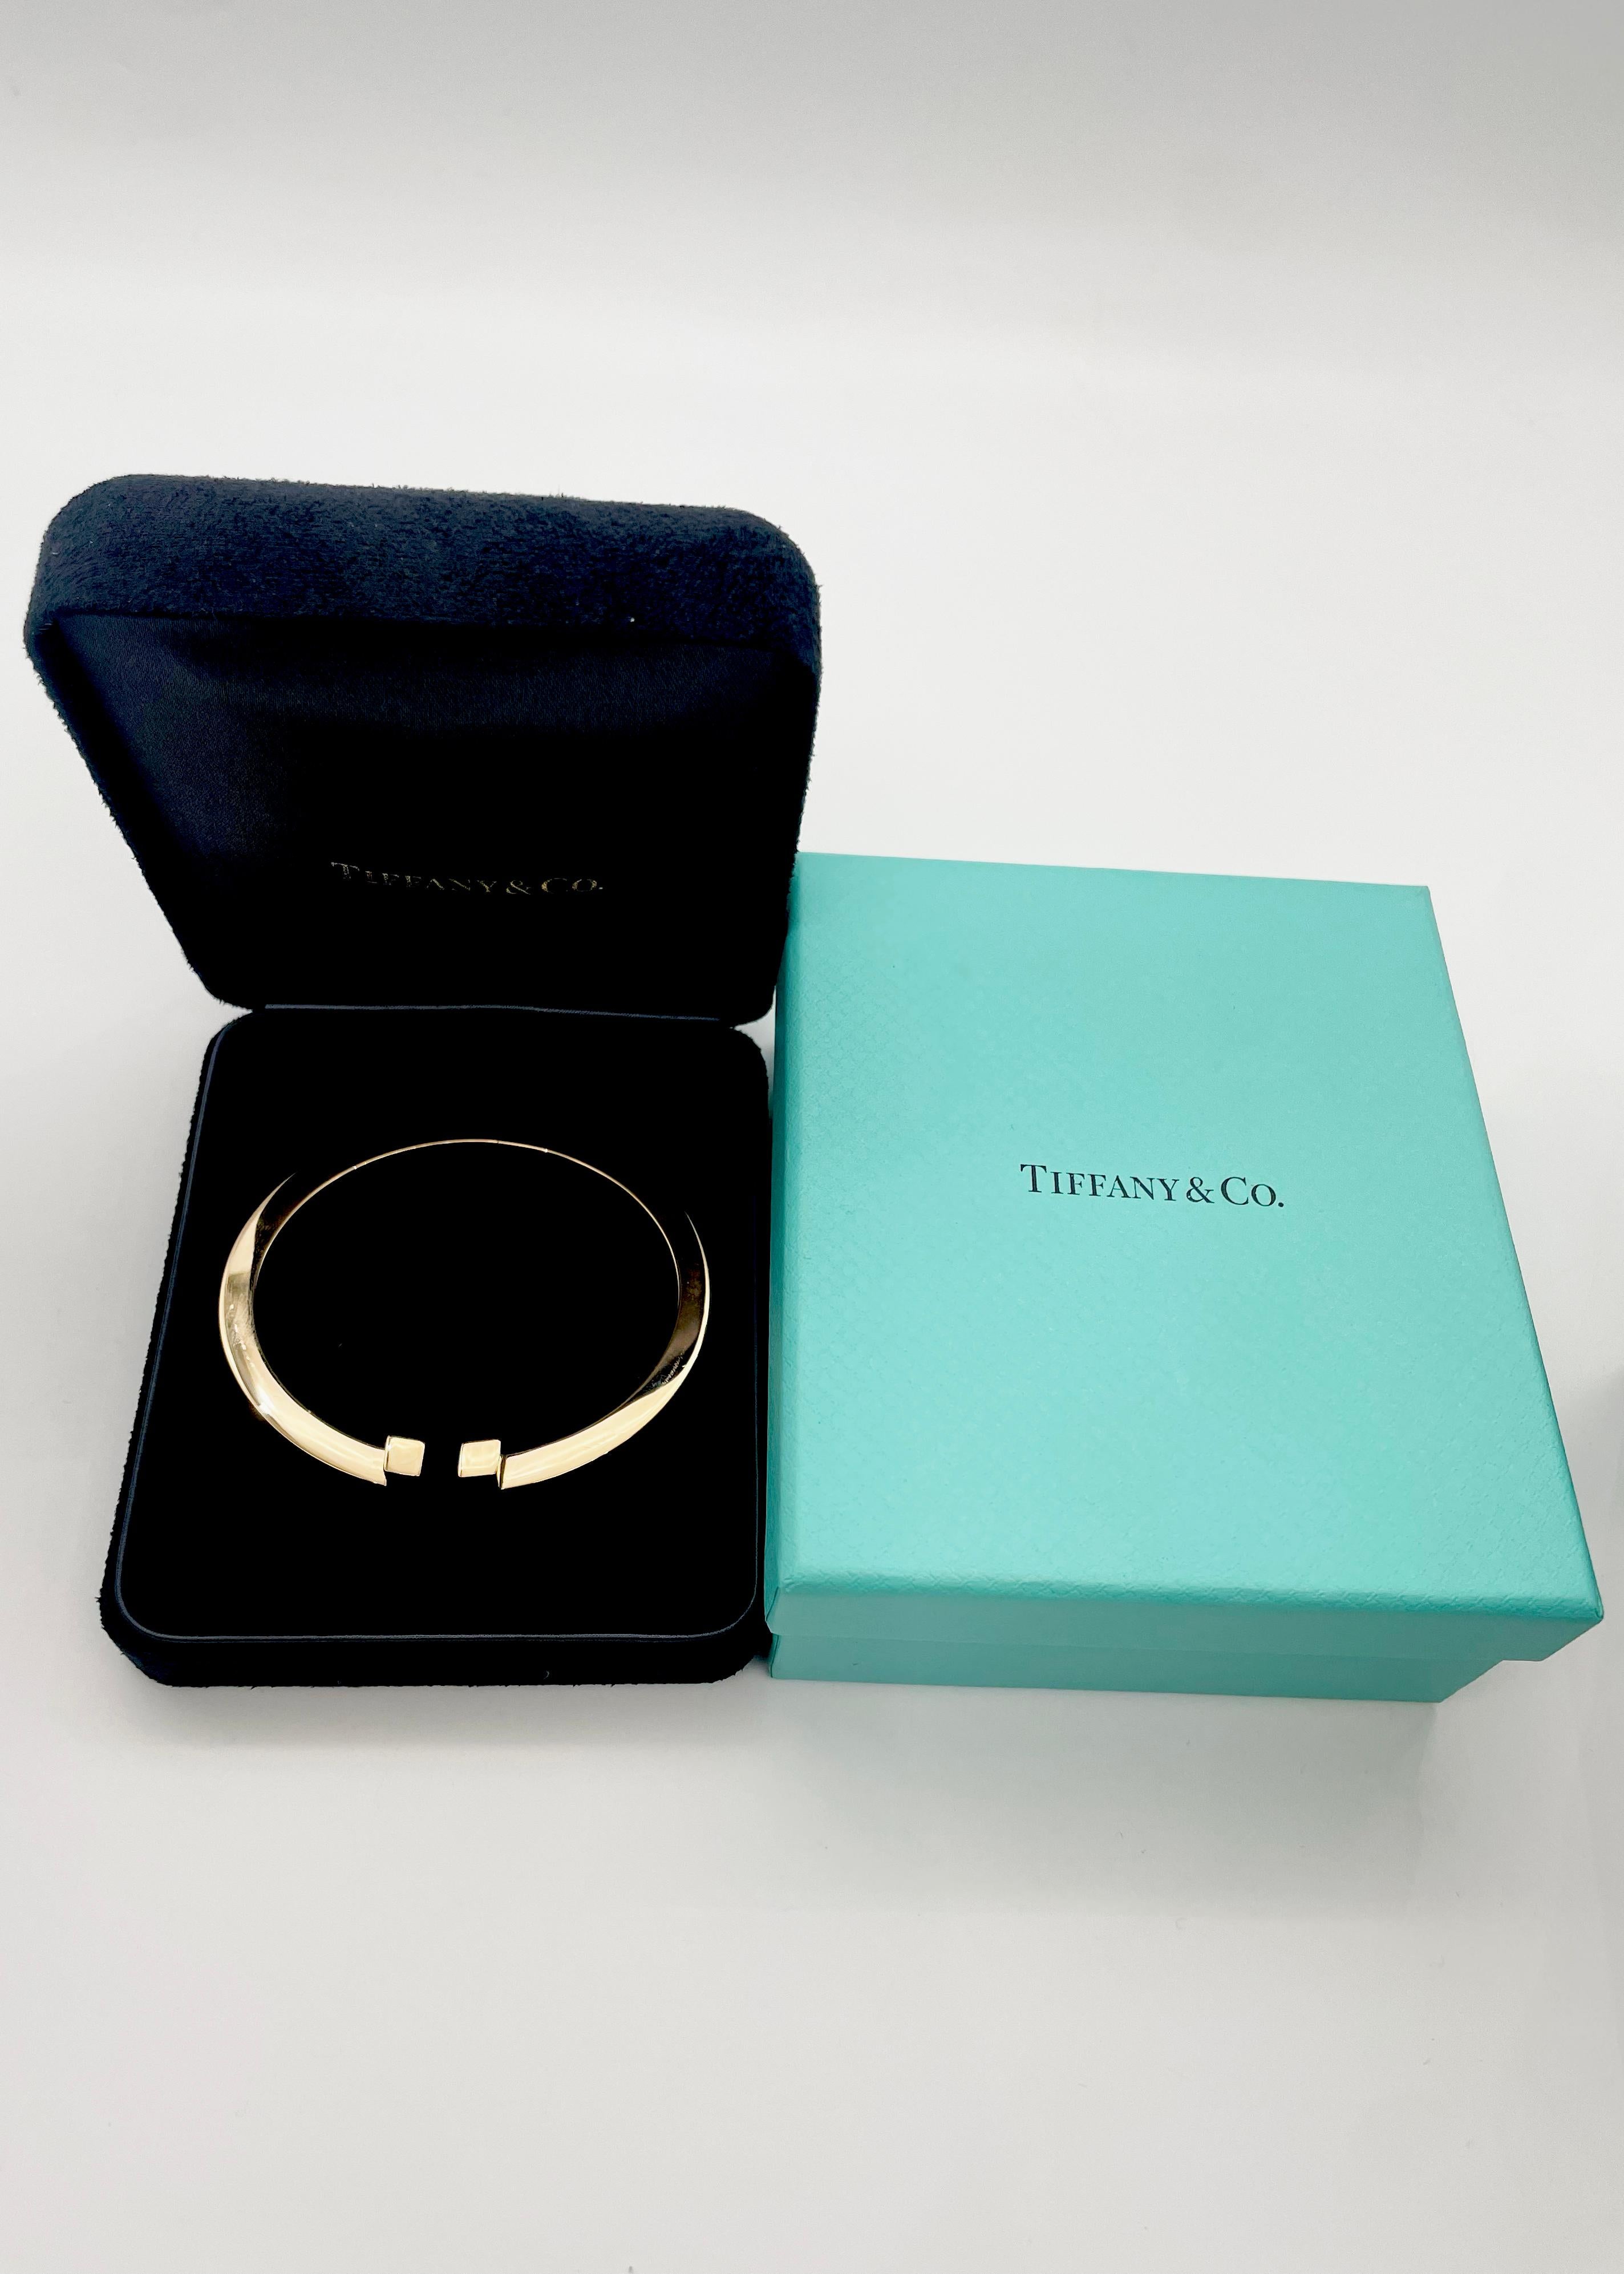 Tiffany & Co. T Square Bracelet 18k Rose Gold with Box In Excellent Condition For Sale In New York, NY